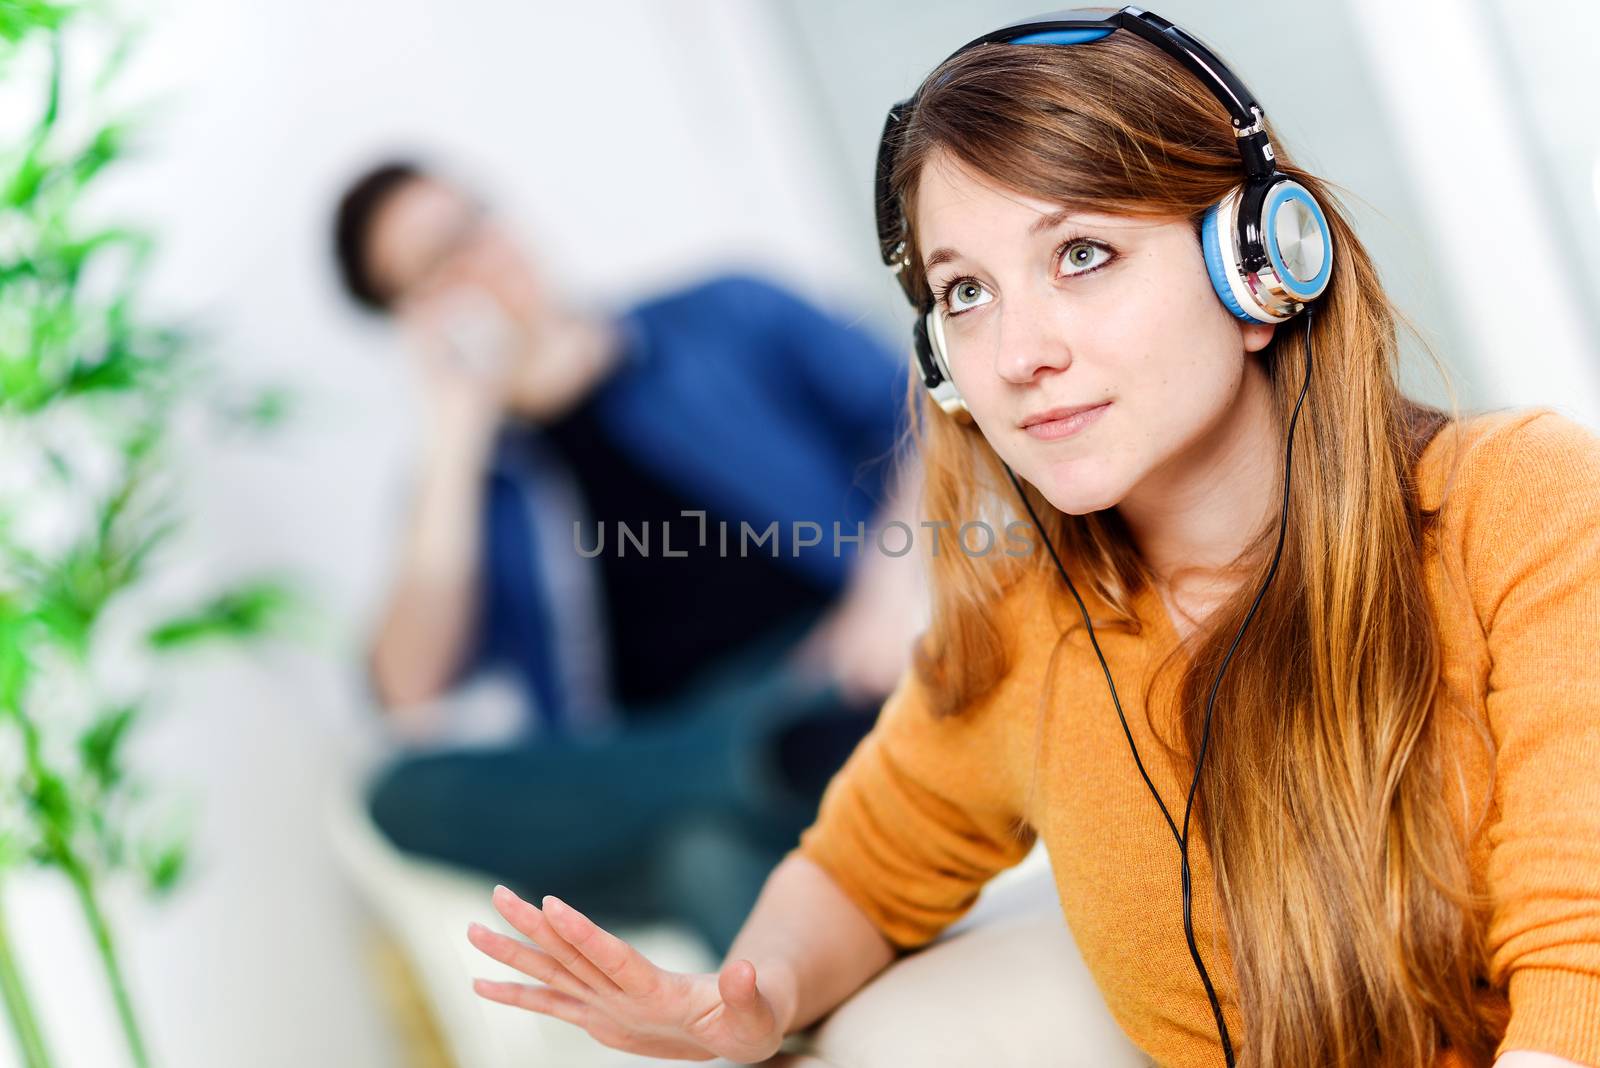 Beautiful blond listening to some music while her boyfriend is bored